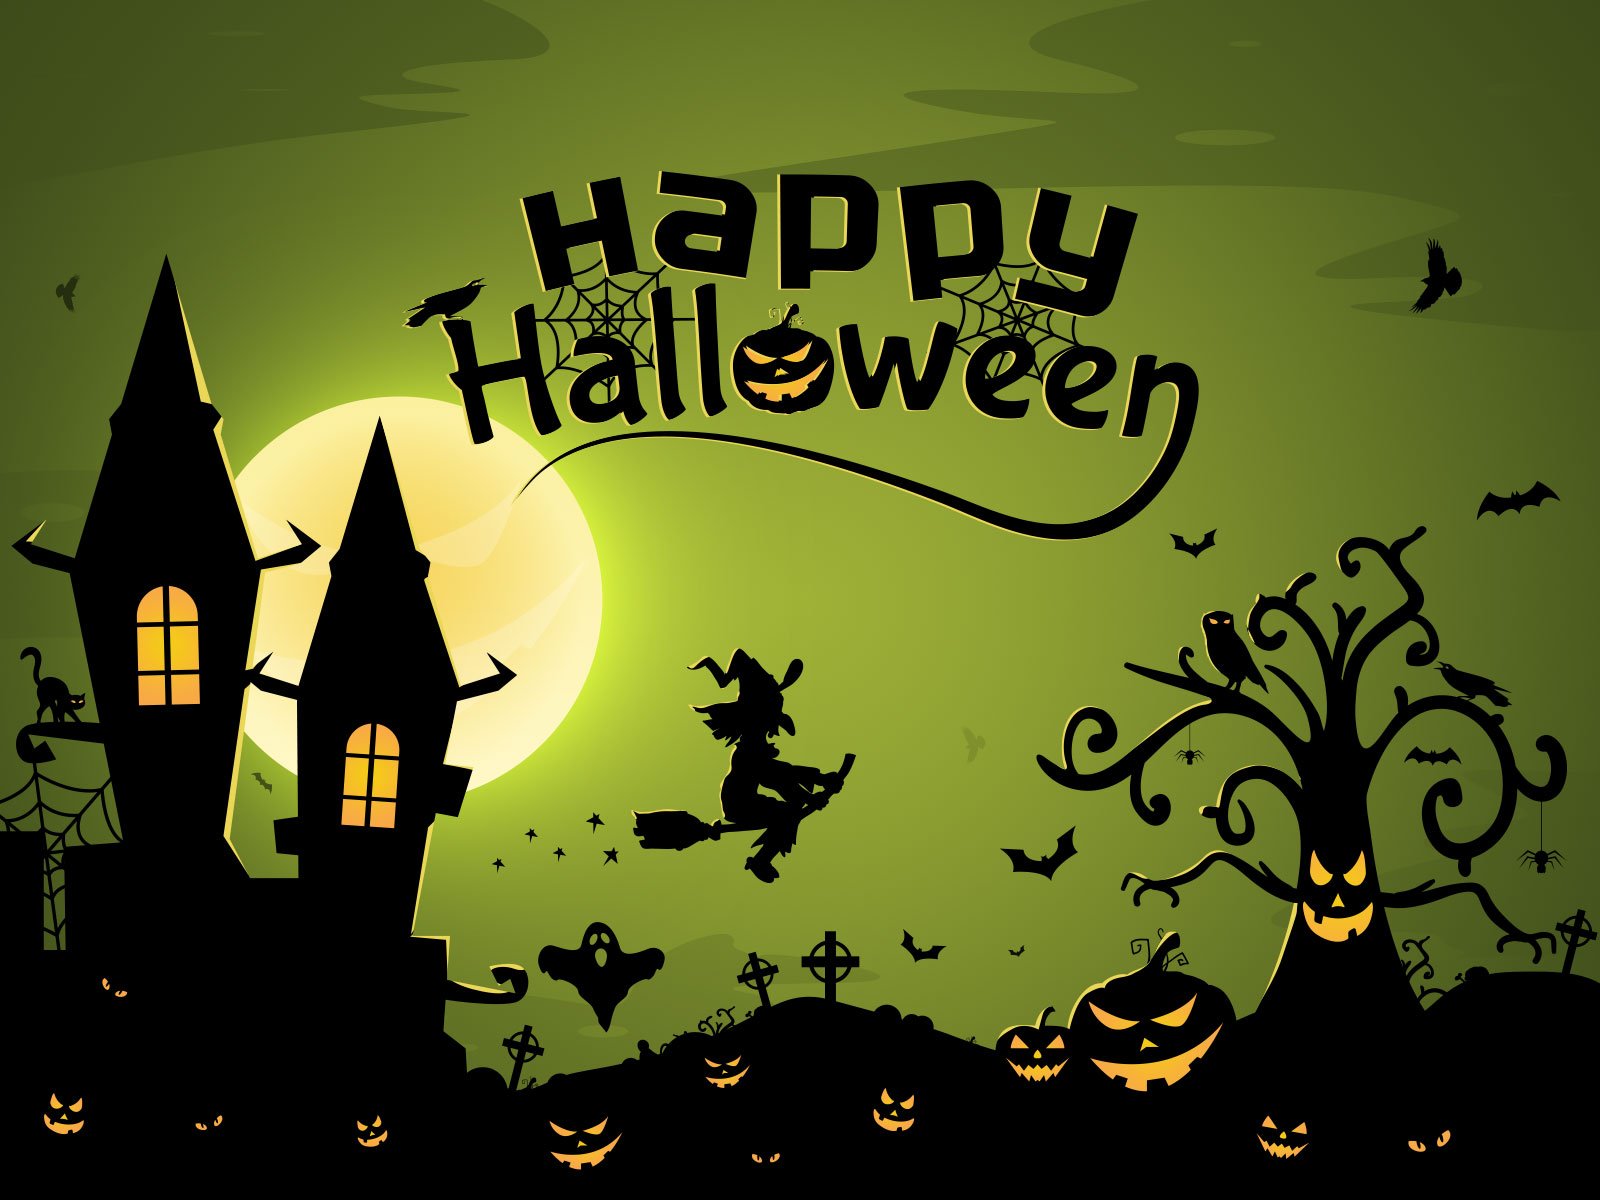 Free download 30 Halloween Vectors PSD Icon amp Party Posters for [1600x1200] for your Desktop, Mobile & Tablet. Explore Happy Halloween Background. Halloween Wallpaper For Desktop, Free Halloween Background Wallpaper